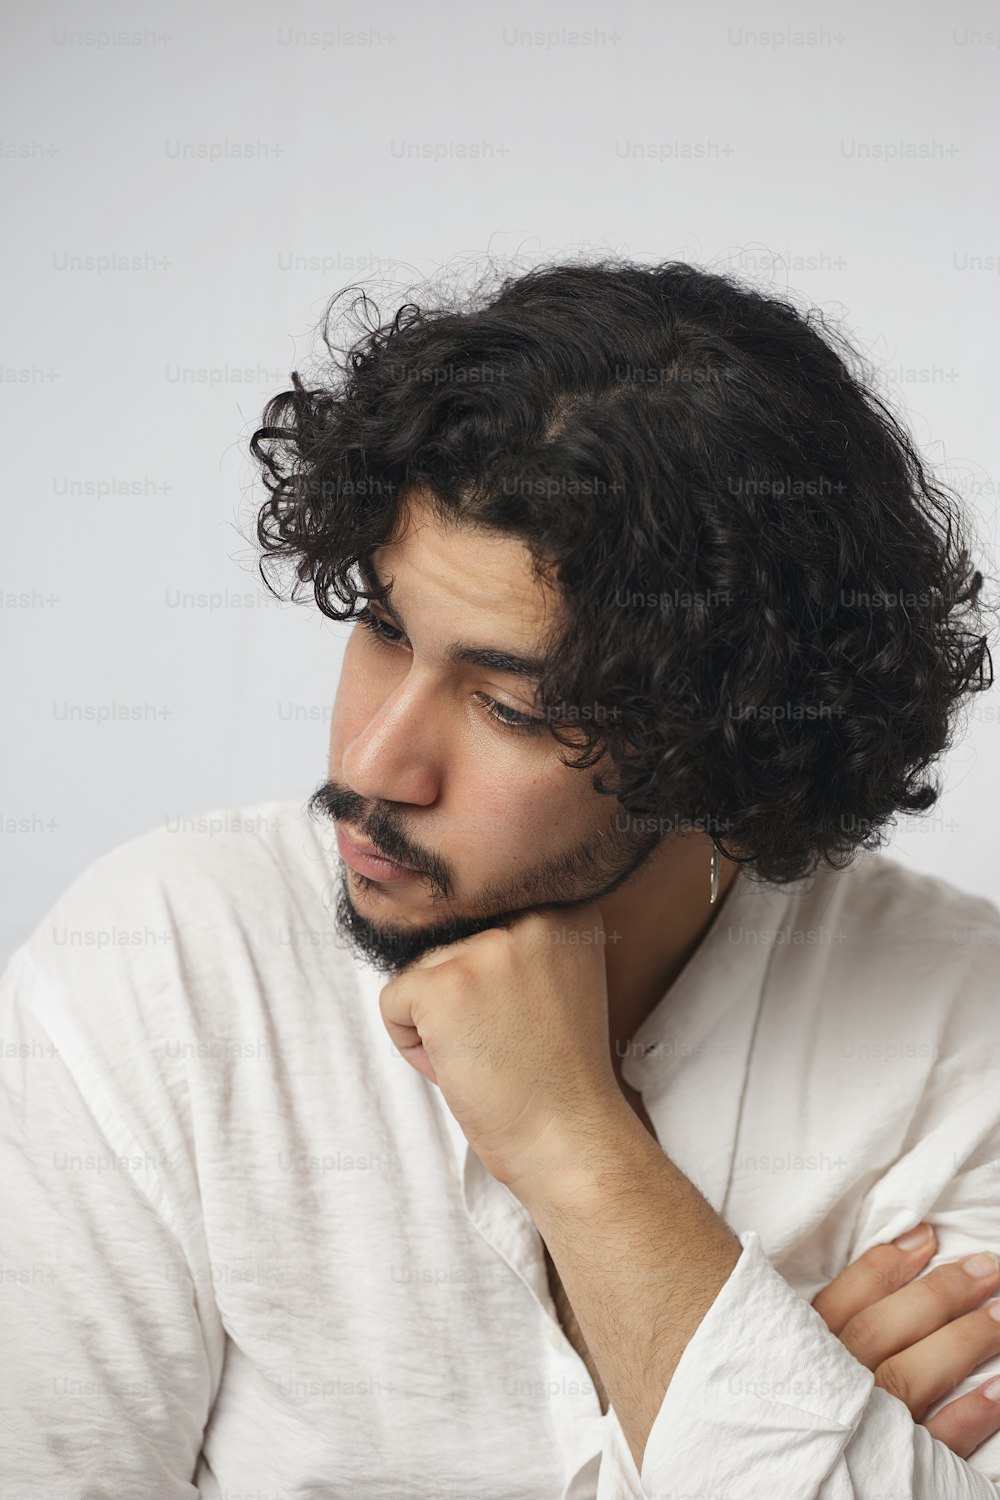 a man with curly hair wearing a white shirt